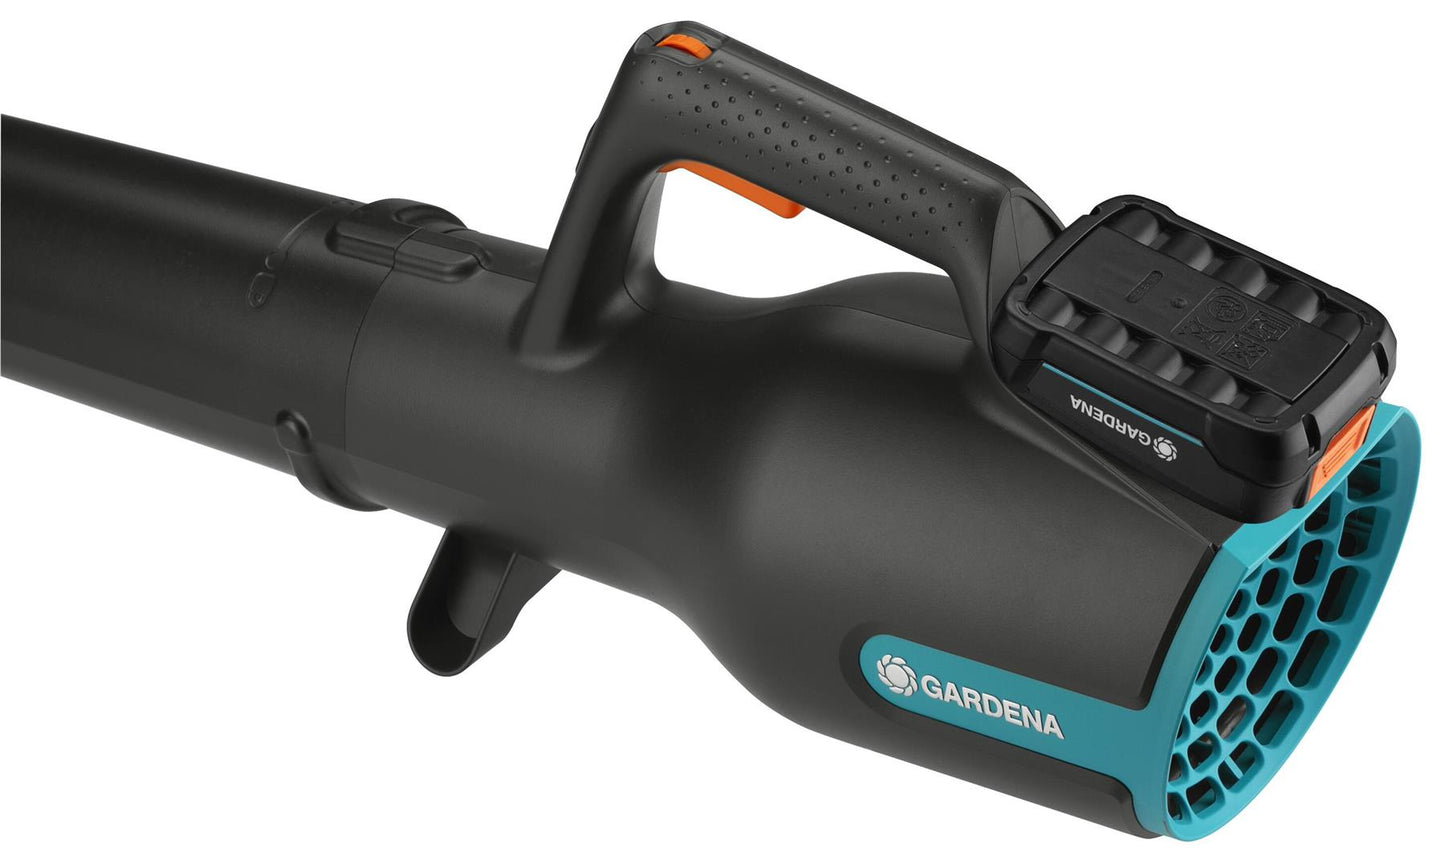 Gardena Battery Blower PowerJet 18V P4A: Effective leaf blower with 18 V motor, 100 km/h blowing speed, light weight, ergonomic handle (14890-55)